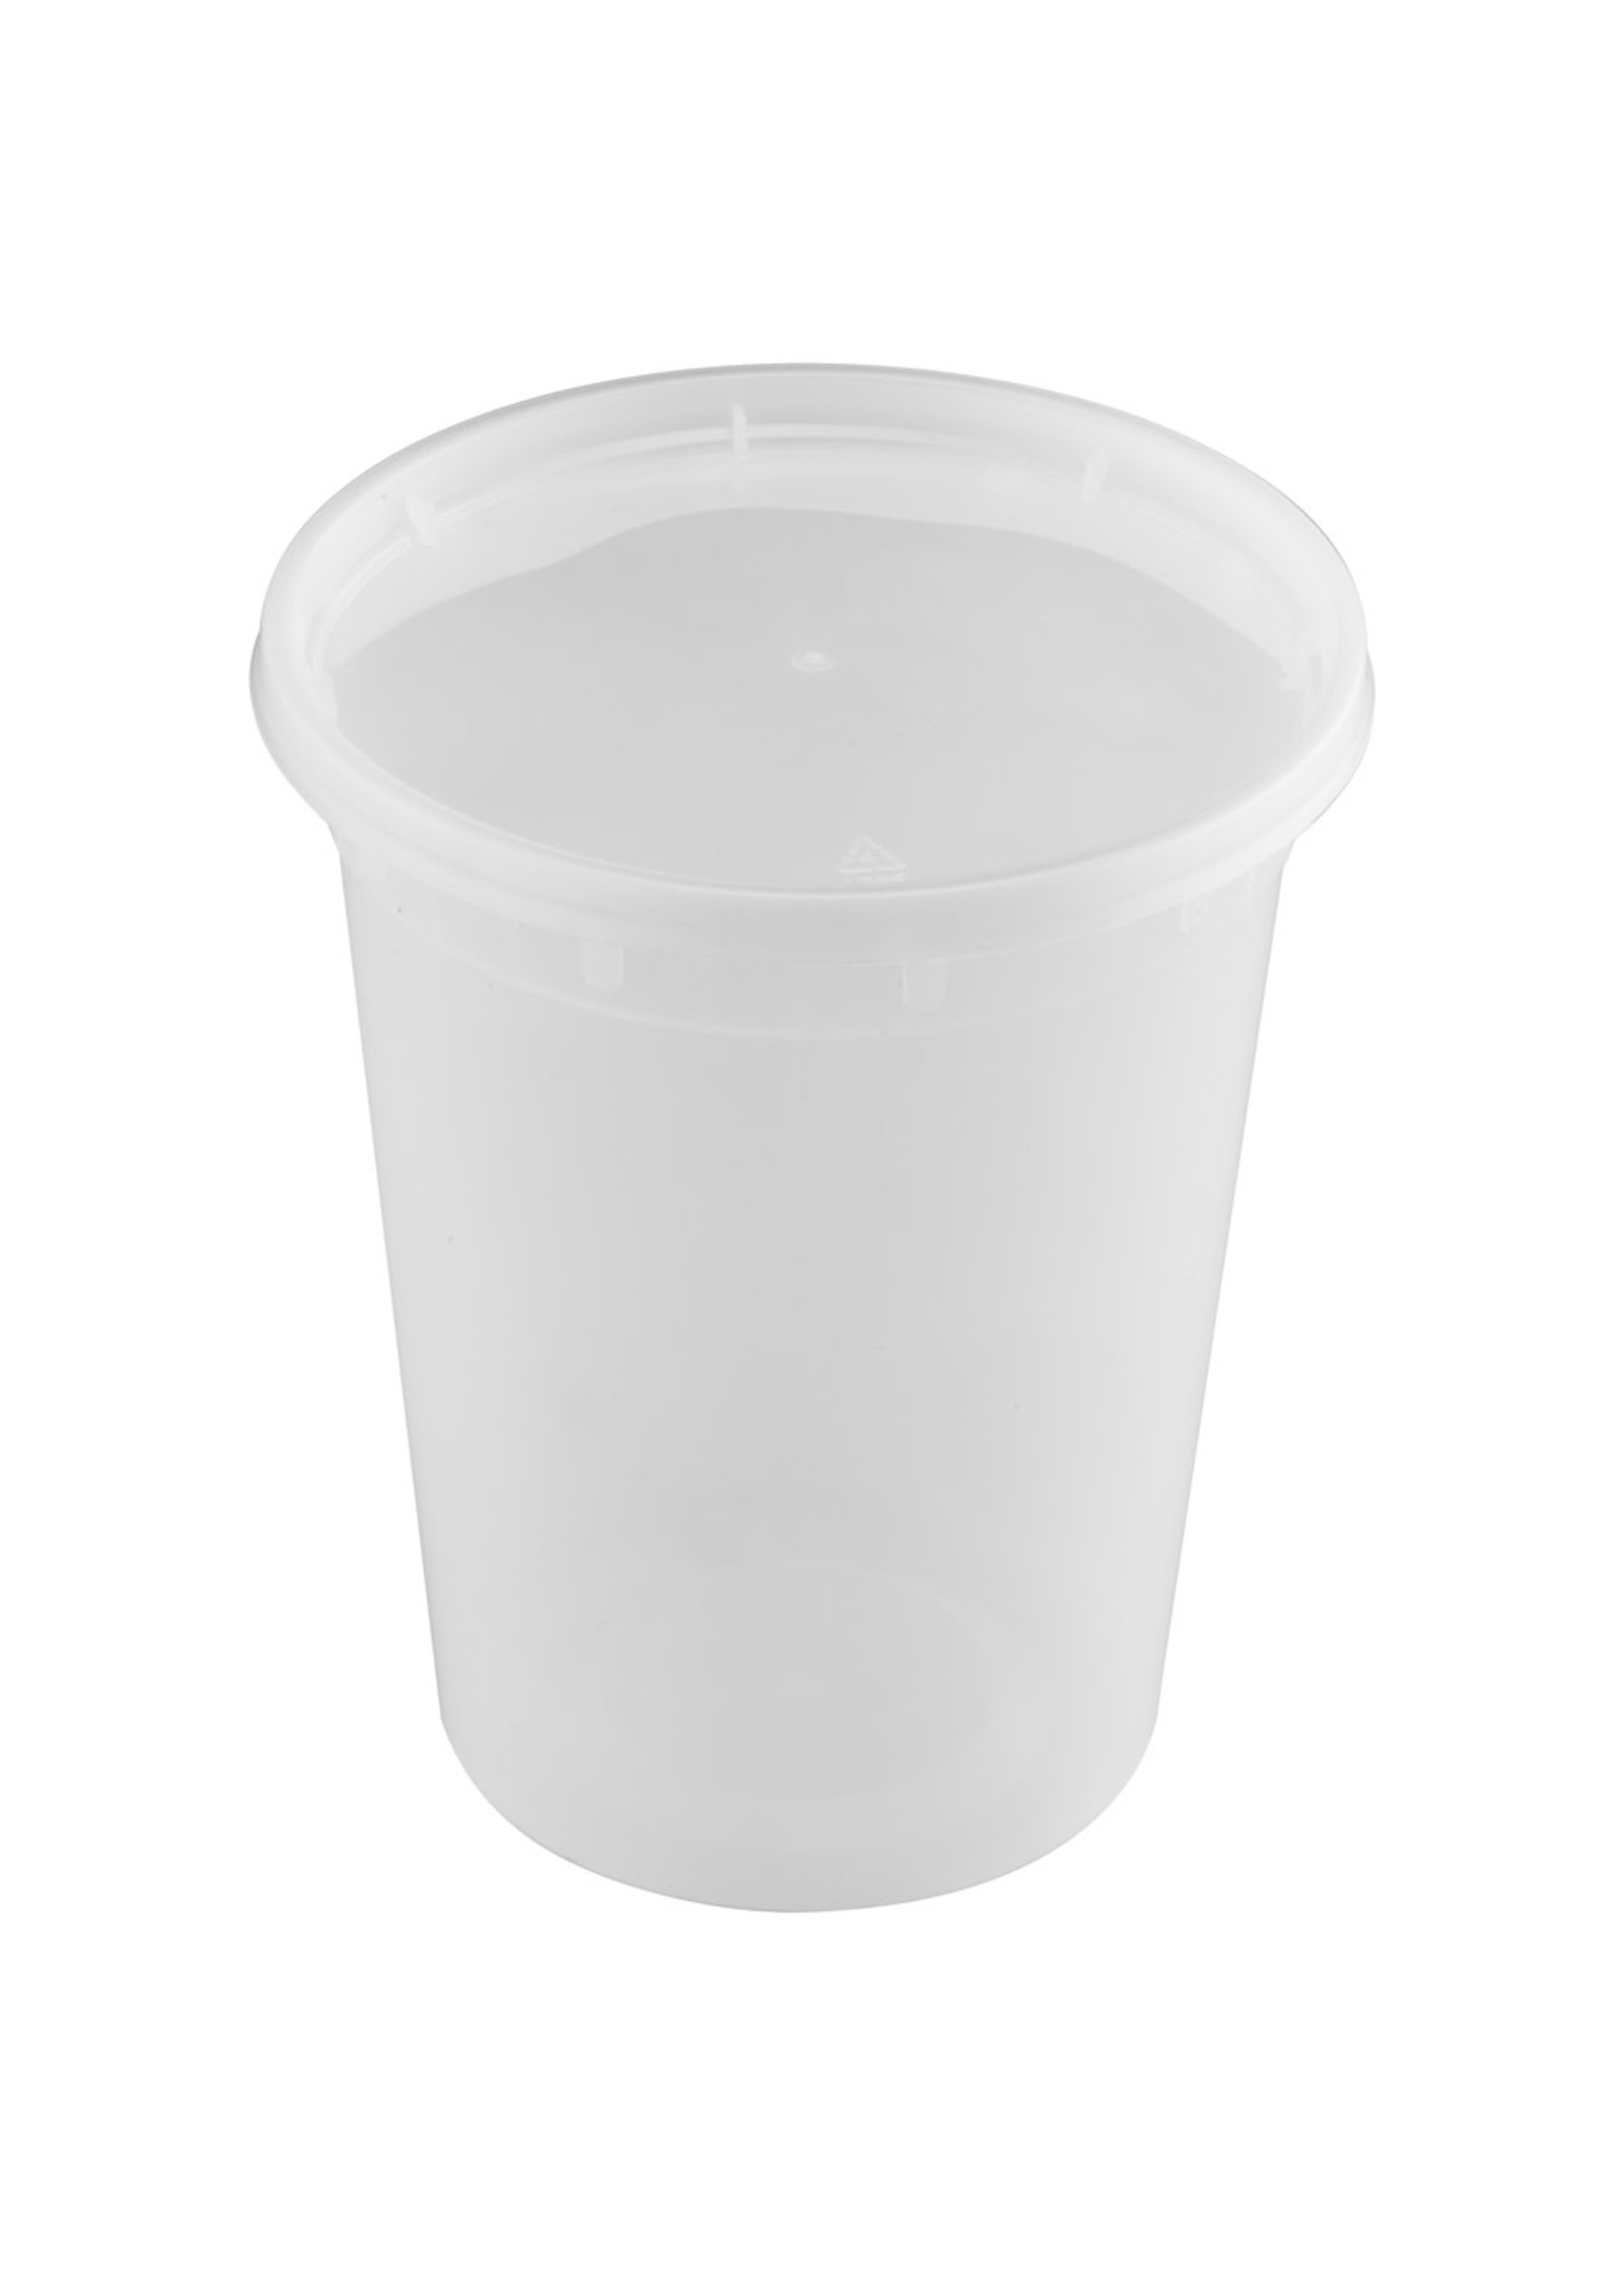 Gladway TY-S24 / DLH24 - 24oz PP Deli Container, 240 sets (24/20)